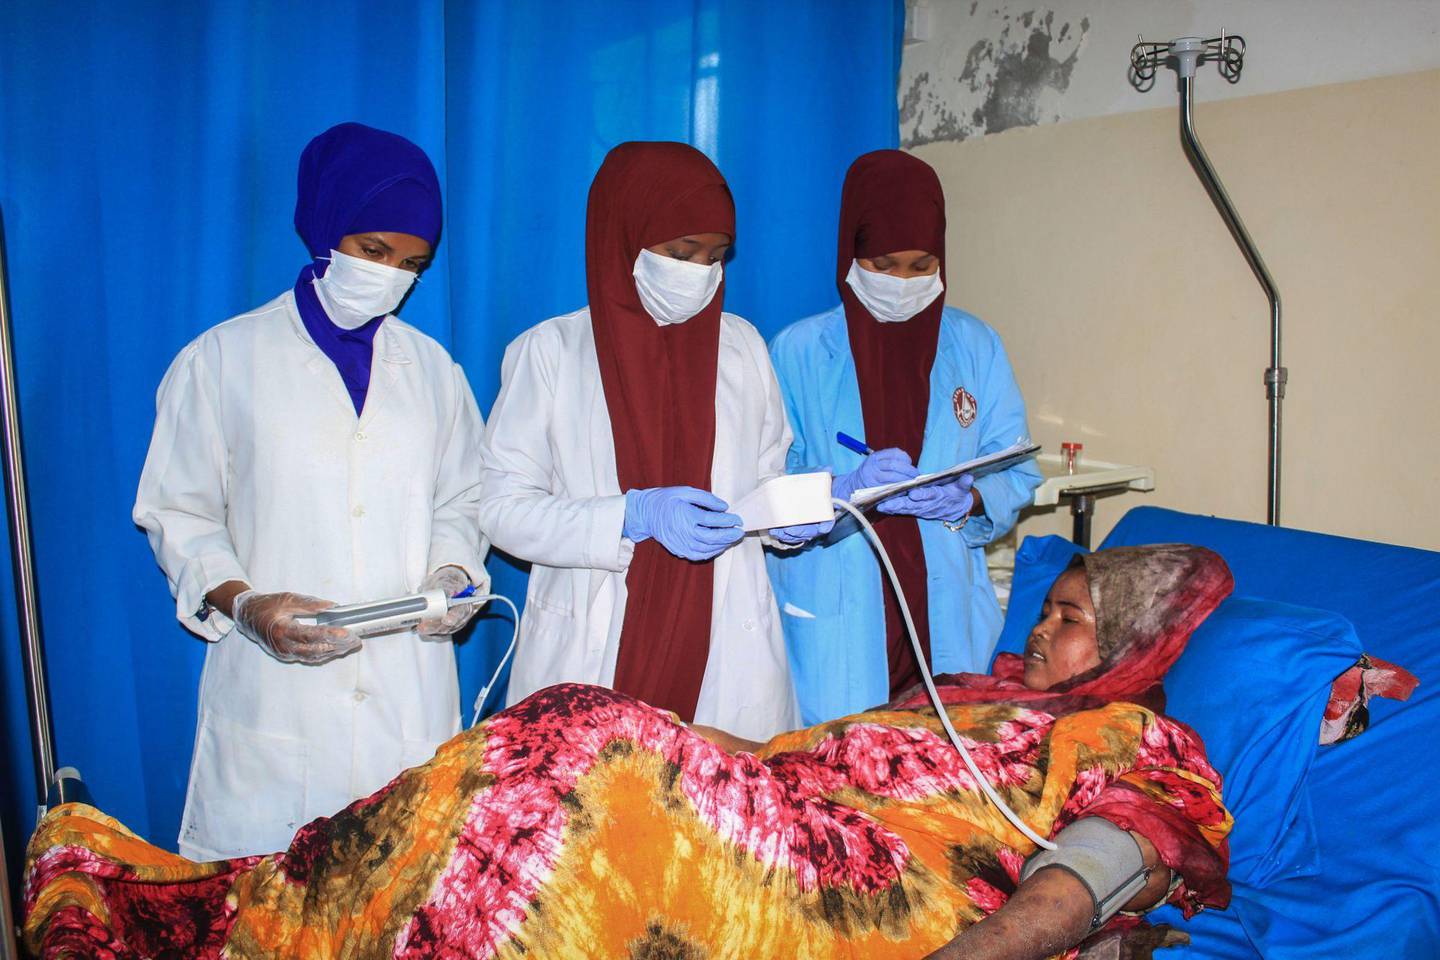 Nurses care for a patient who is recovered from the coronavirus (COVID-19) in the recovery ward at Martini hospital in Mogadishu, Somalia, on July 29, 2020. (Photo by STR / AFP)